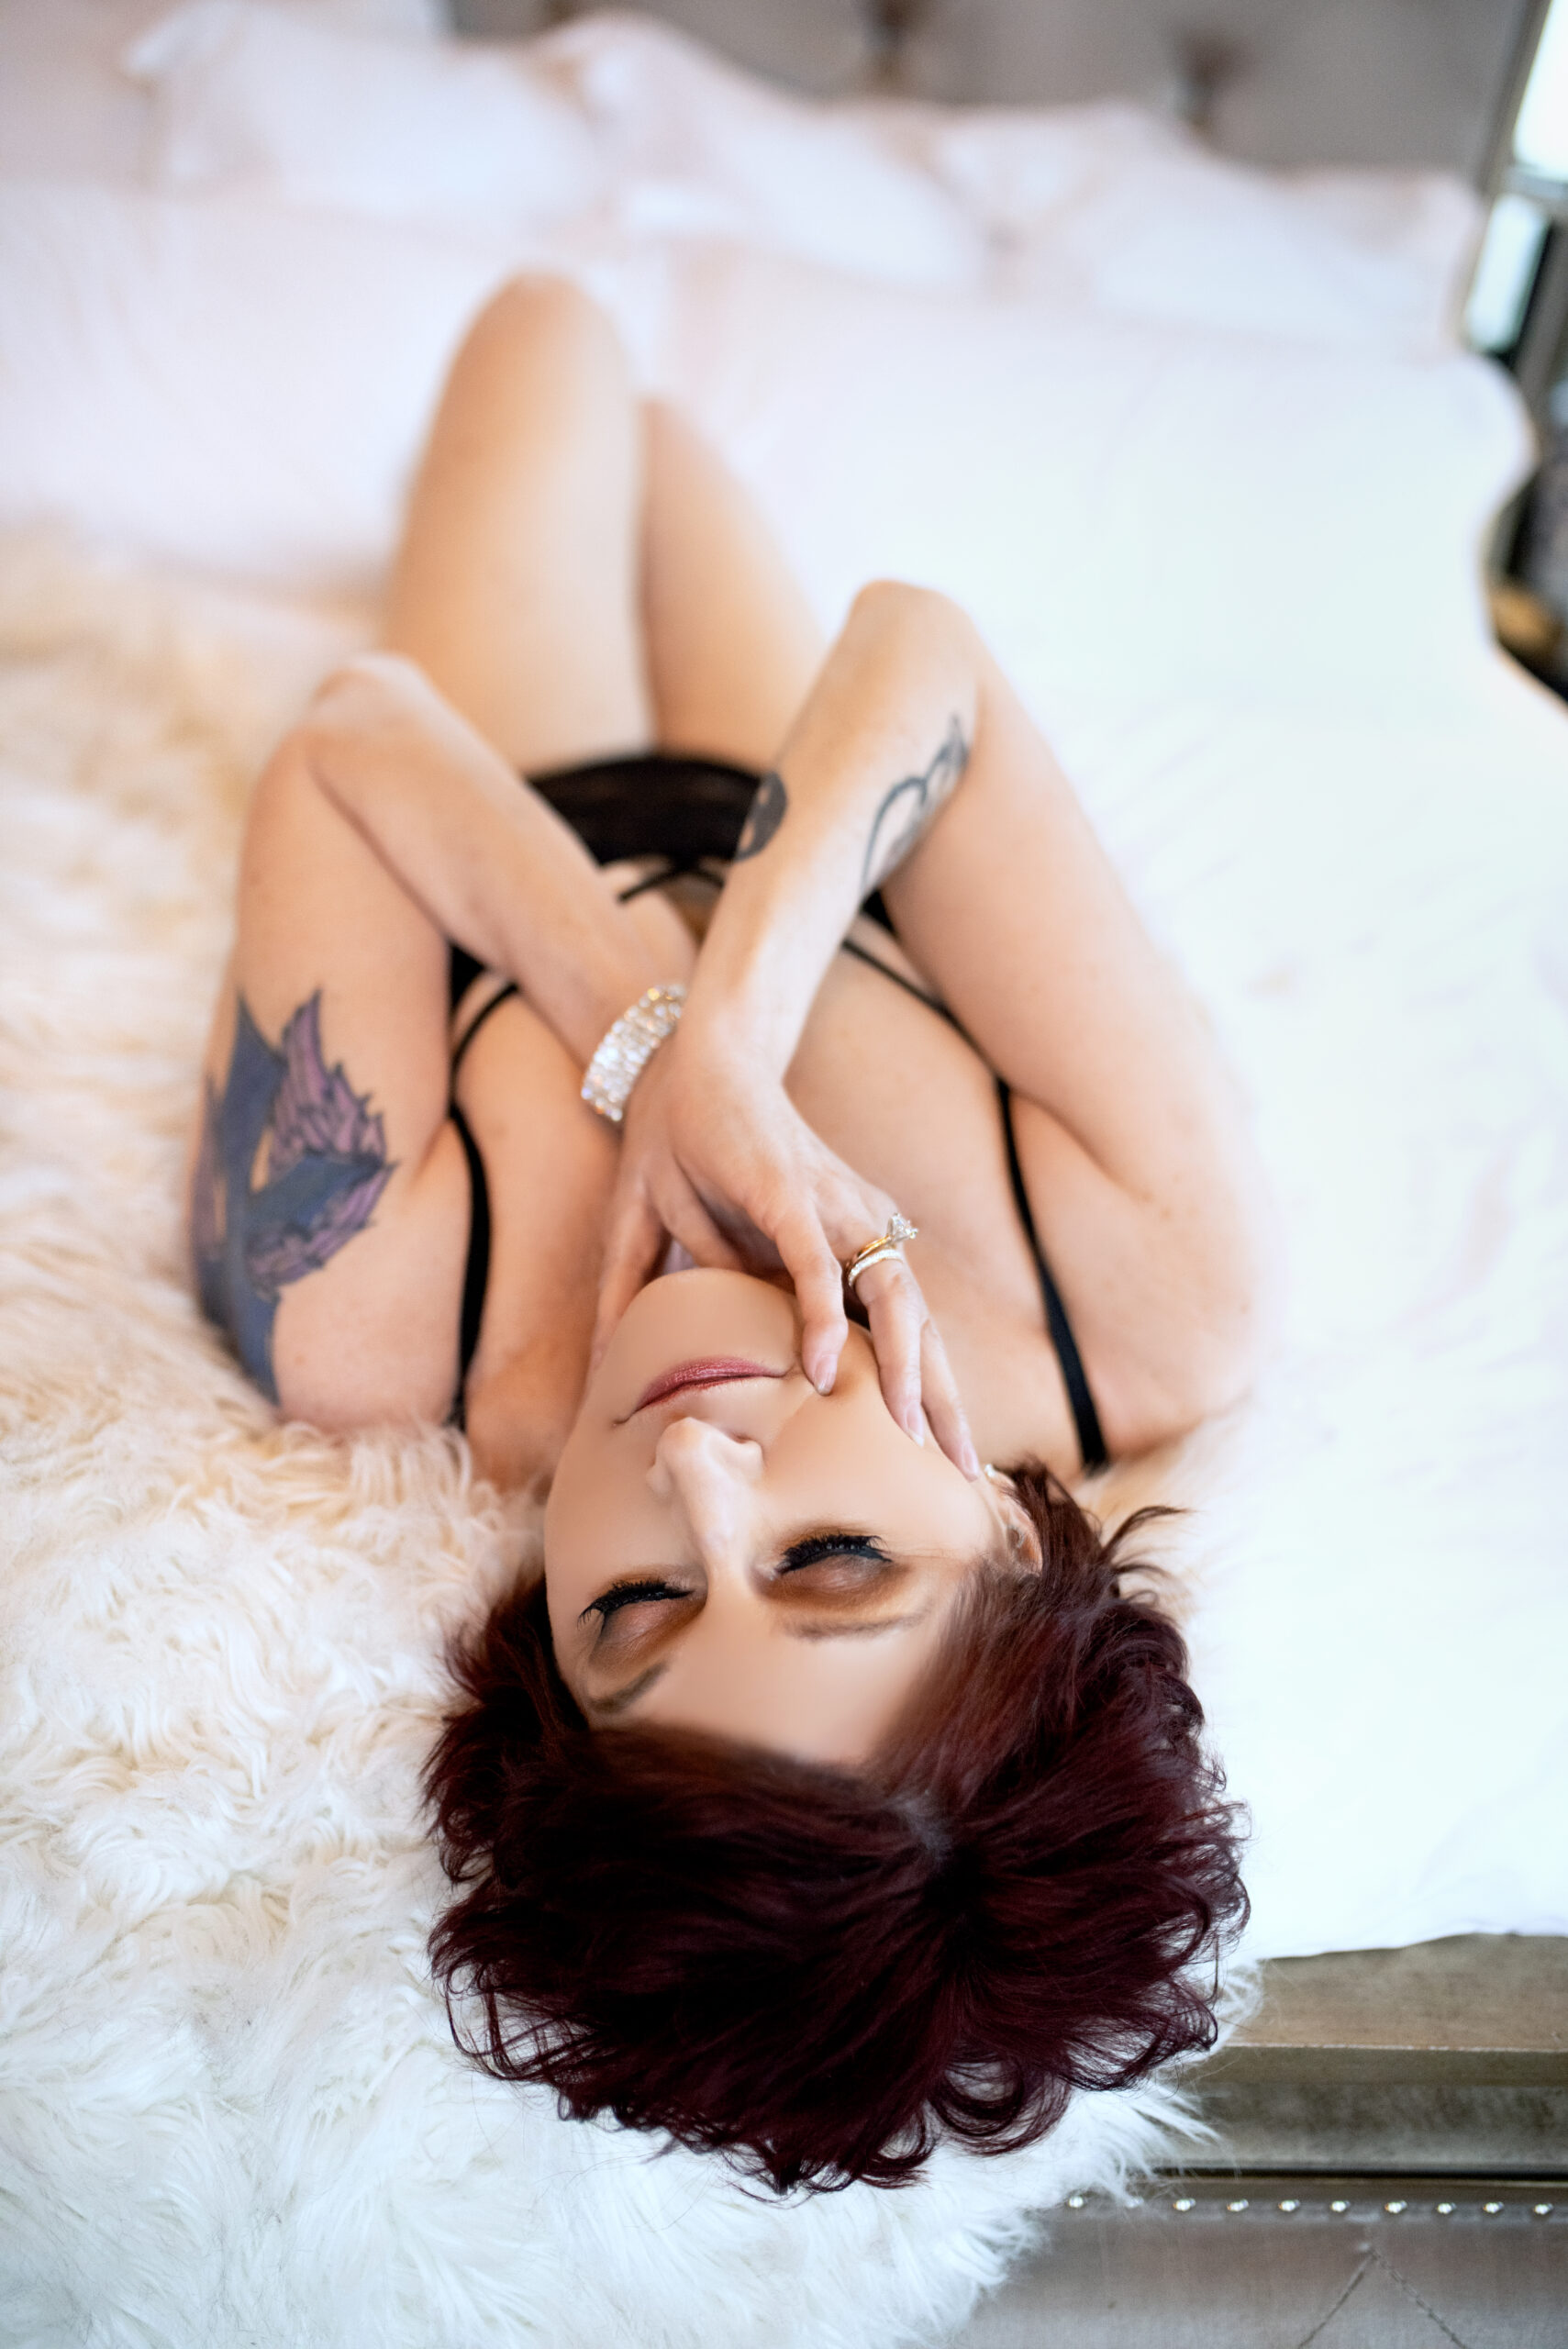 Lying on the gorgeous master bed adorned with a white fur blanket, an older woman with short reddish-brown hair poses confidently in a black lingerie set showing off her wedding ring. The setting is the opulent Gatsby penthouse in Midtown, St. Louis, Missouri, owned by Josh Gould of Gould Holdings. The image was captured by Aloha Kelly of Love Exposed Boudoir.